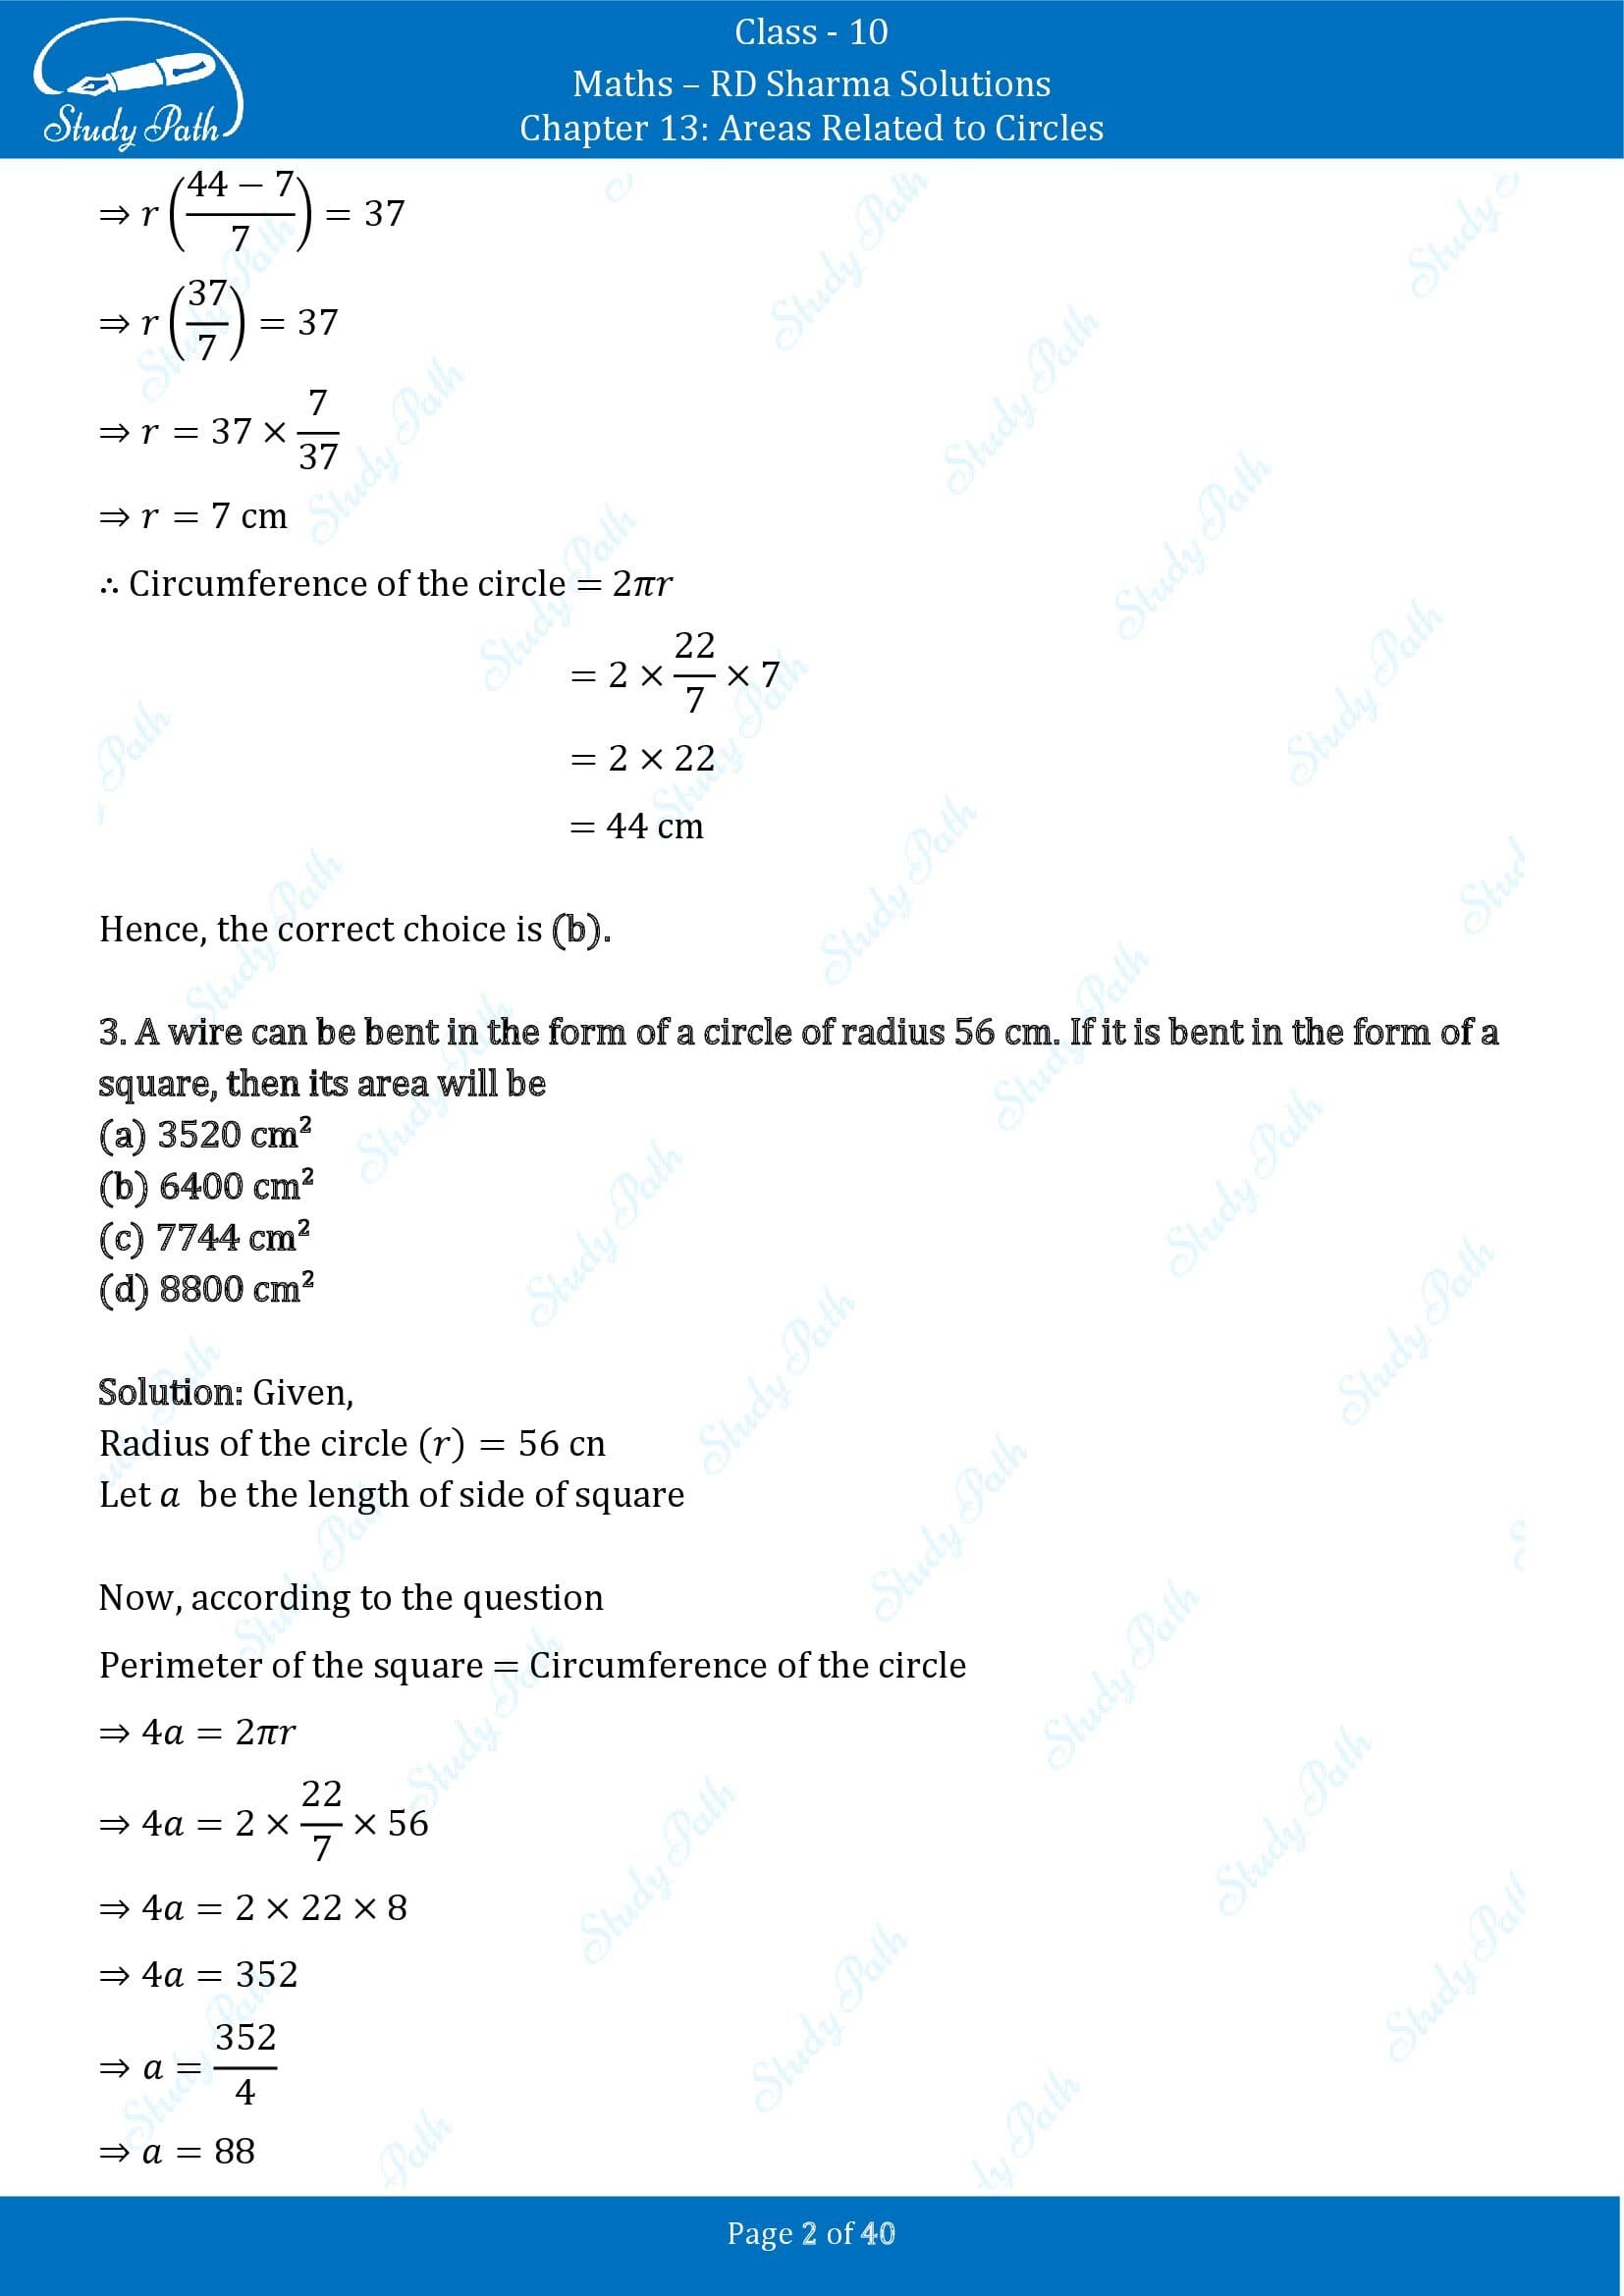 RD Sharma Solutions Class 10 Chapter 13 Areas Related to Circles Multiple Choice Question MCQs 00002